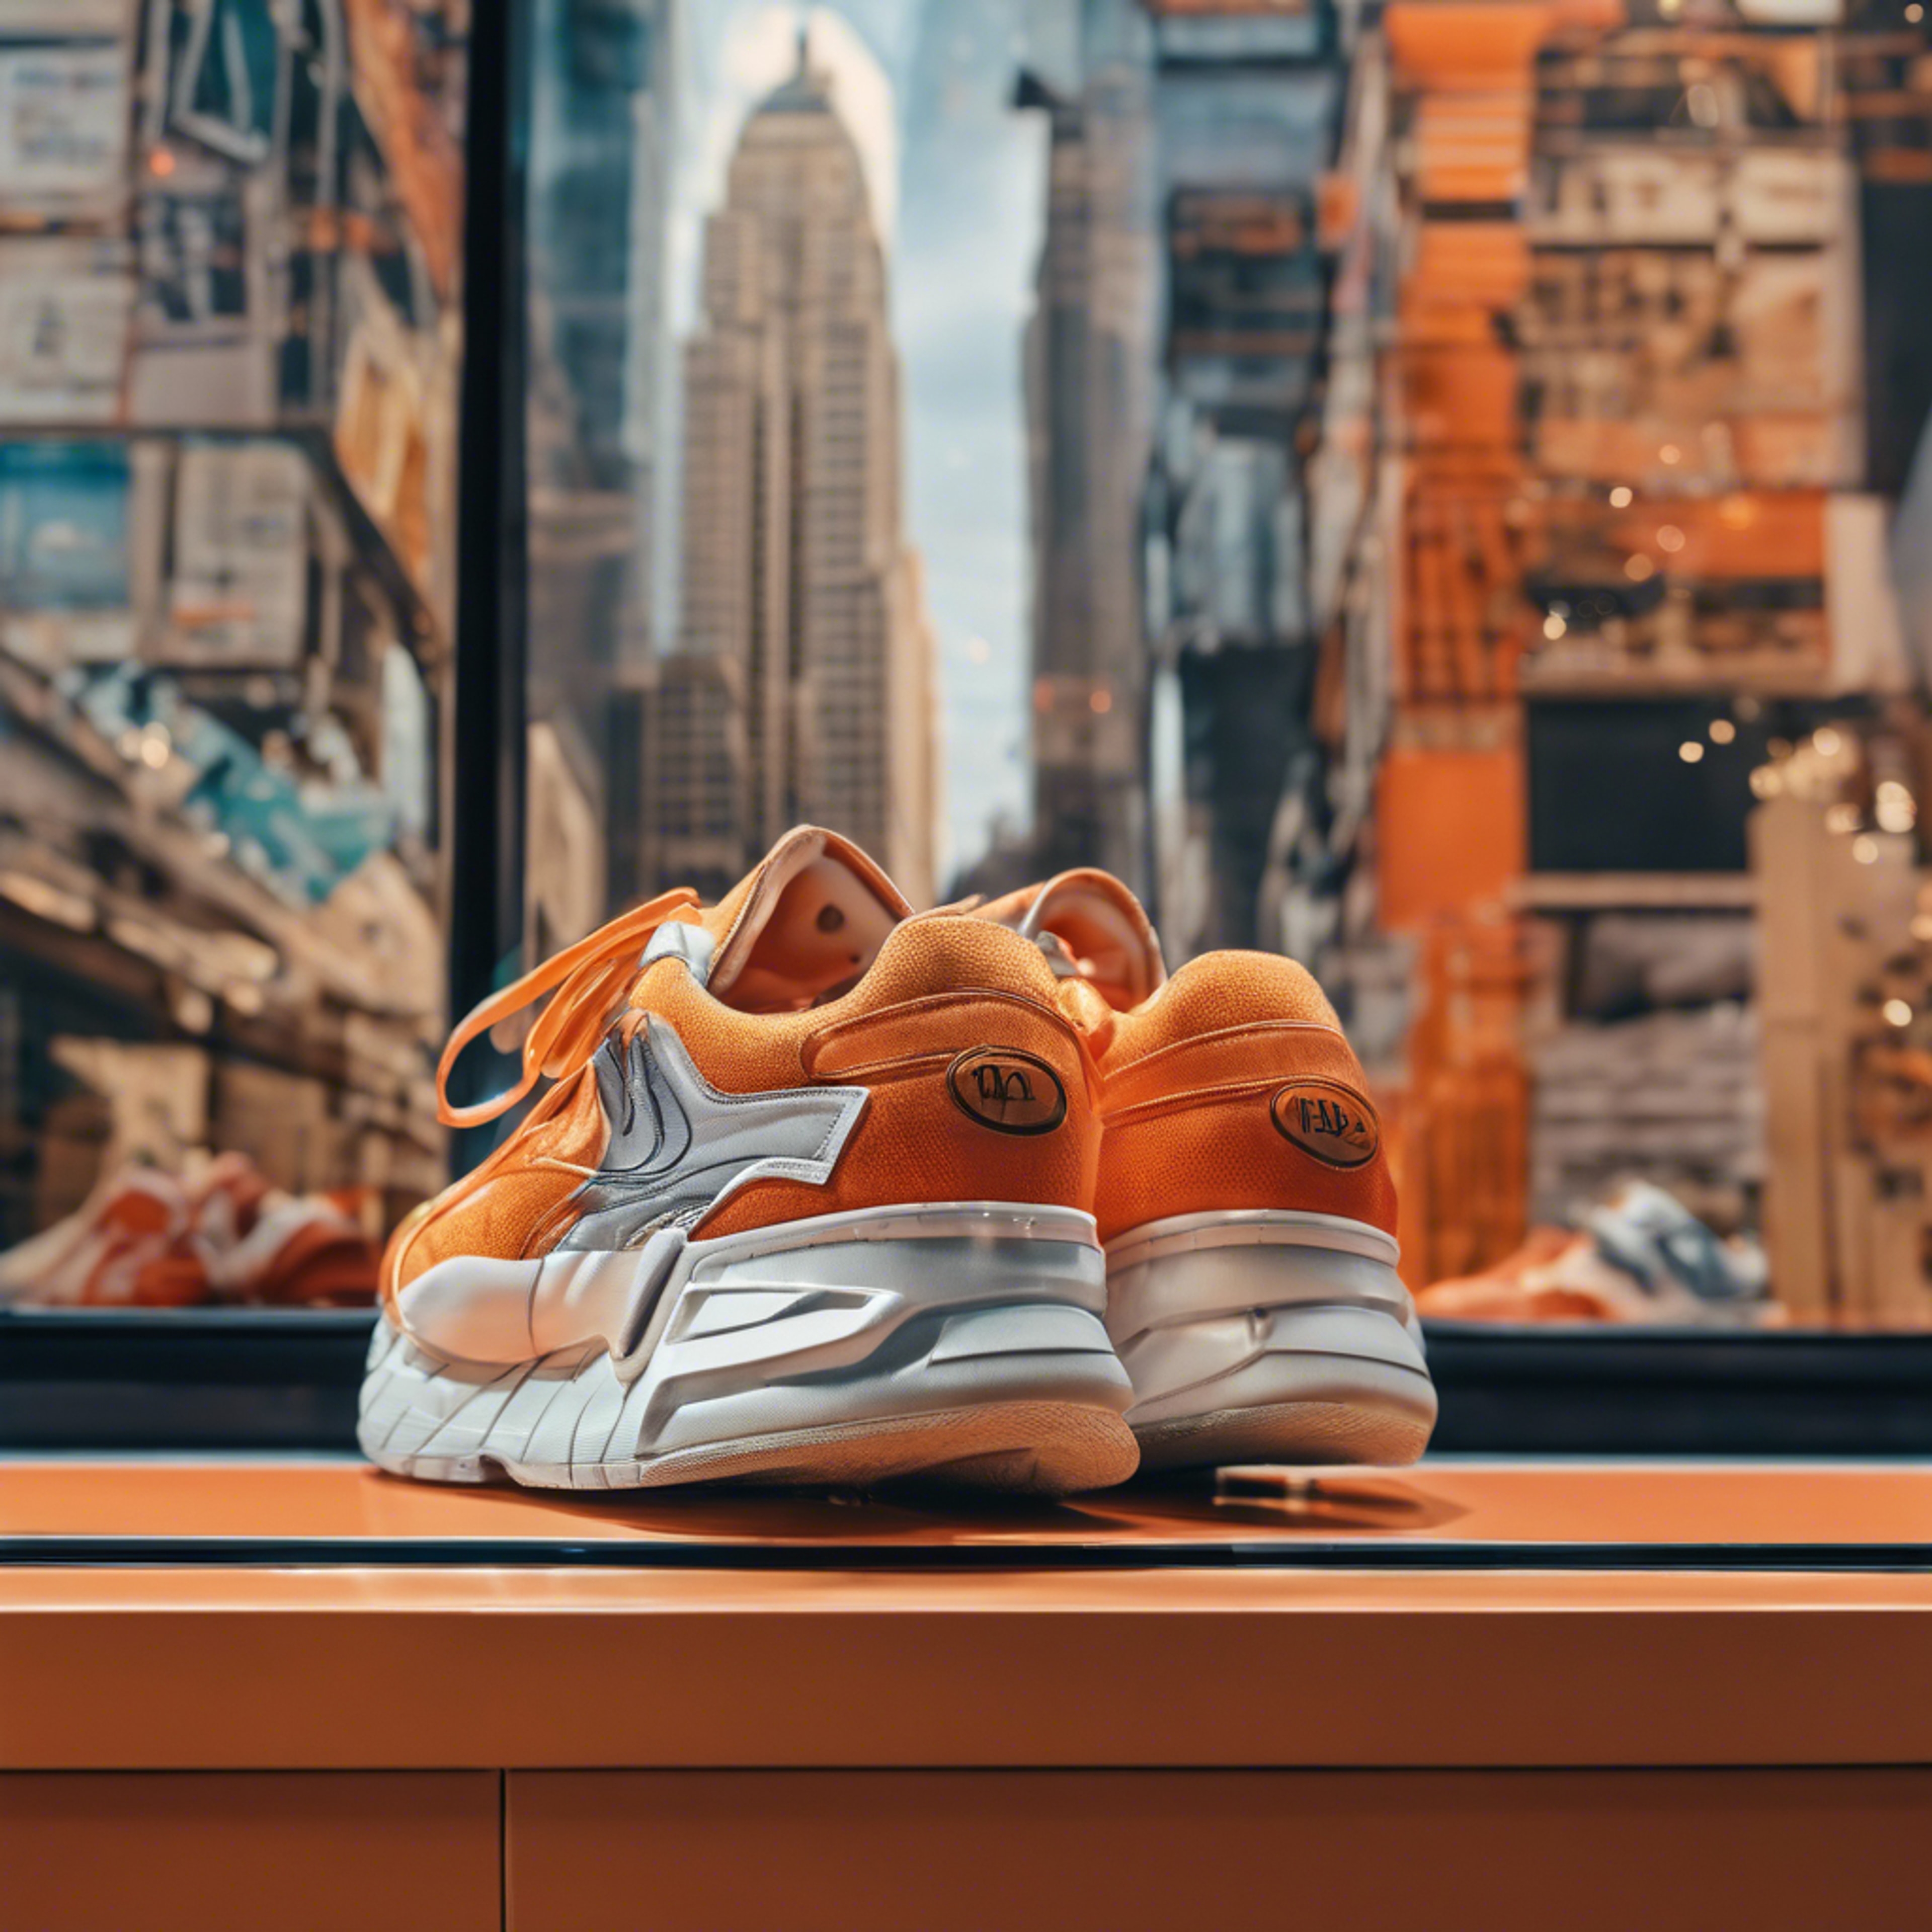 Orange Y2K-inspired sneakers displayed in a shoe store window with a retro cityscape backdrop. Ფონი[c42ef01953ac4184b365]